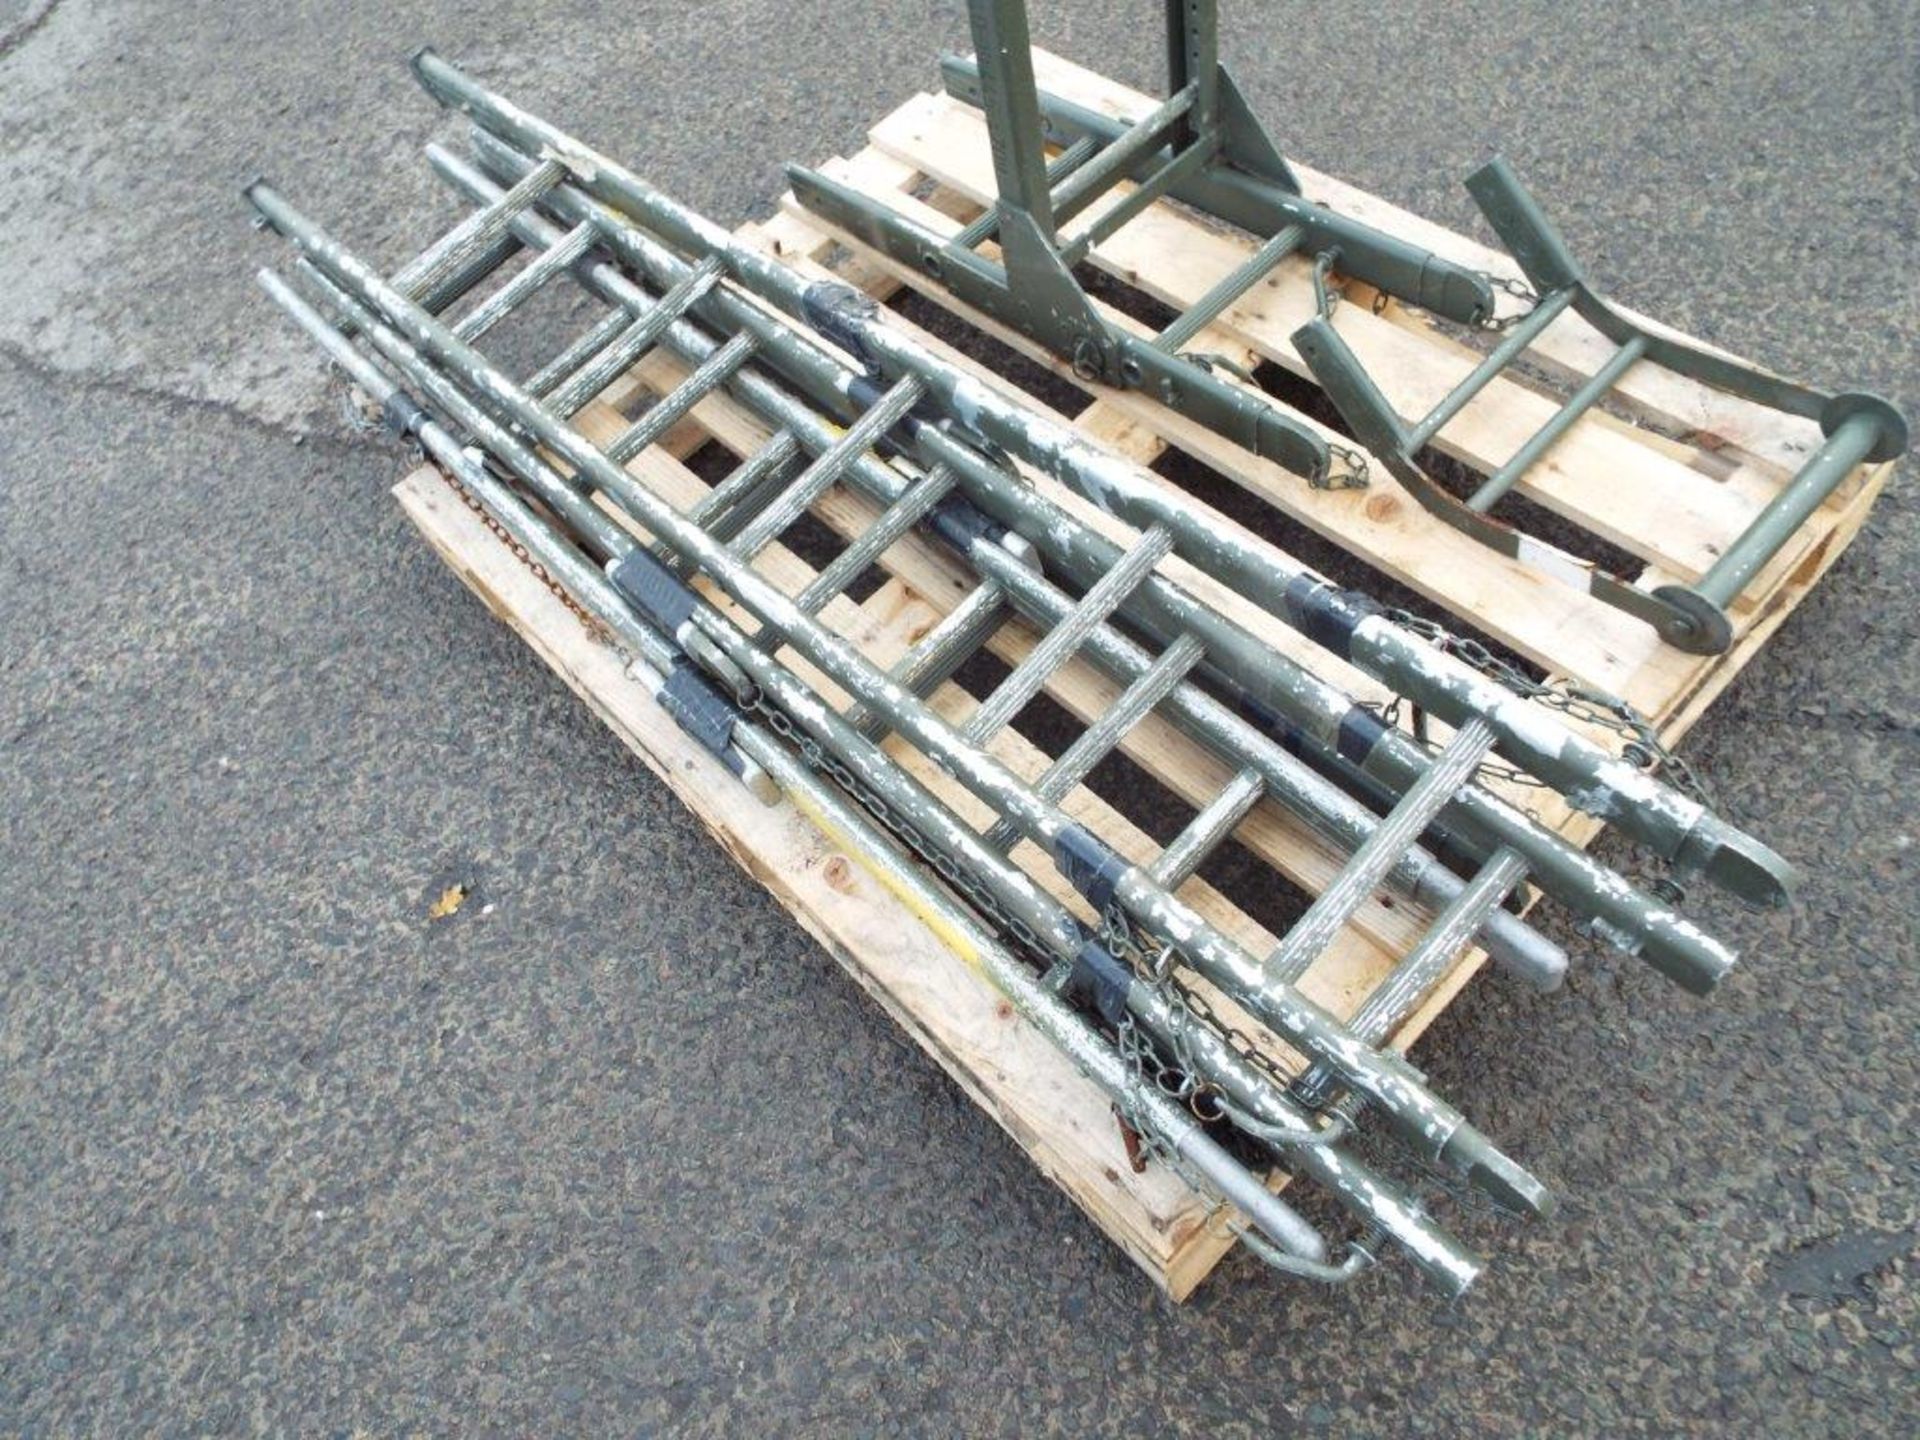 4 Section Military Aluminium Scaling/Assault Ladder with Ridge Hook and Roller Attachments - Bild 2 aus 7